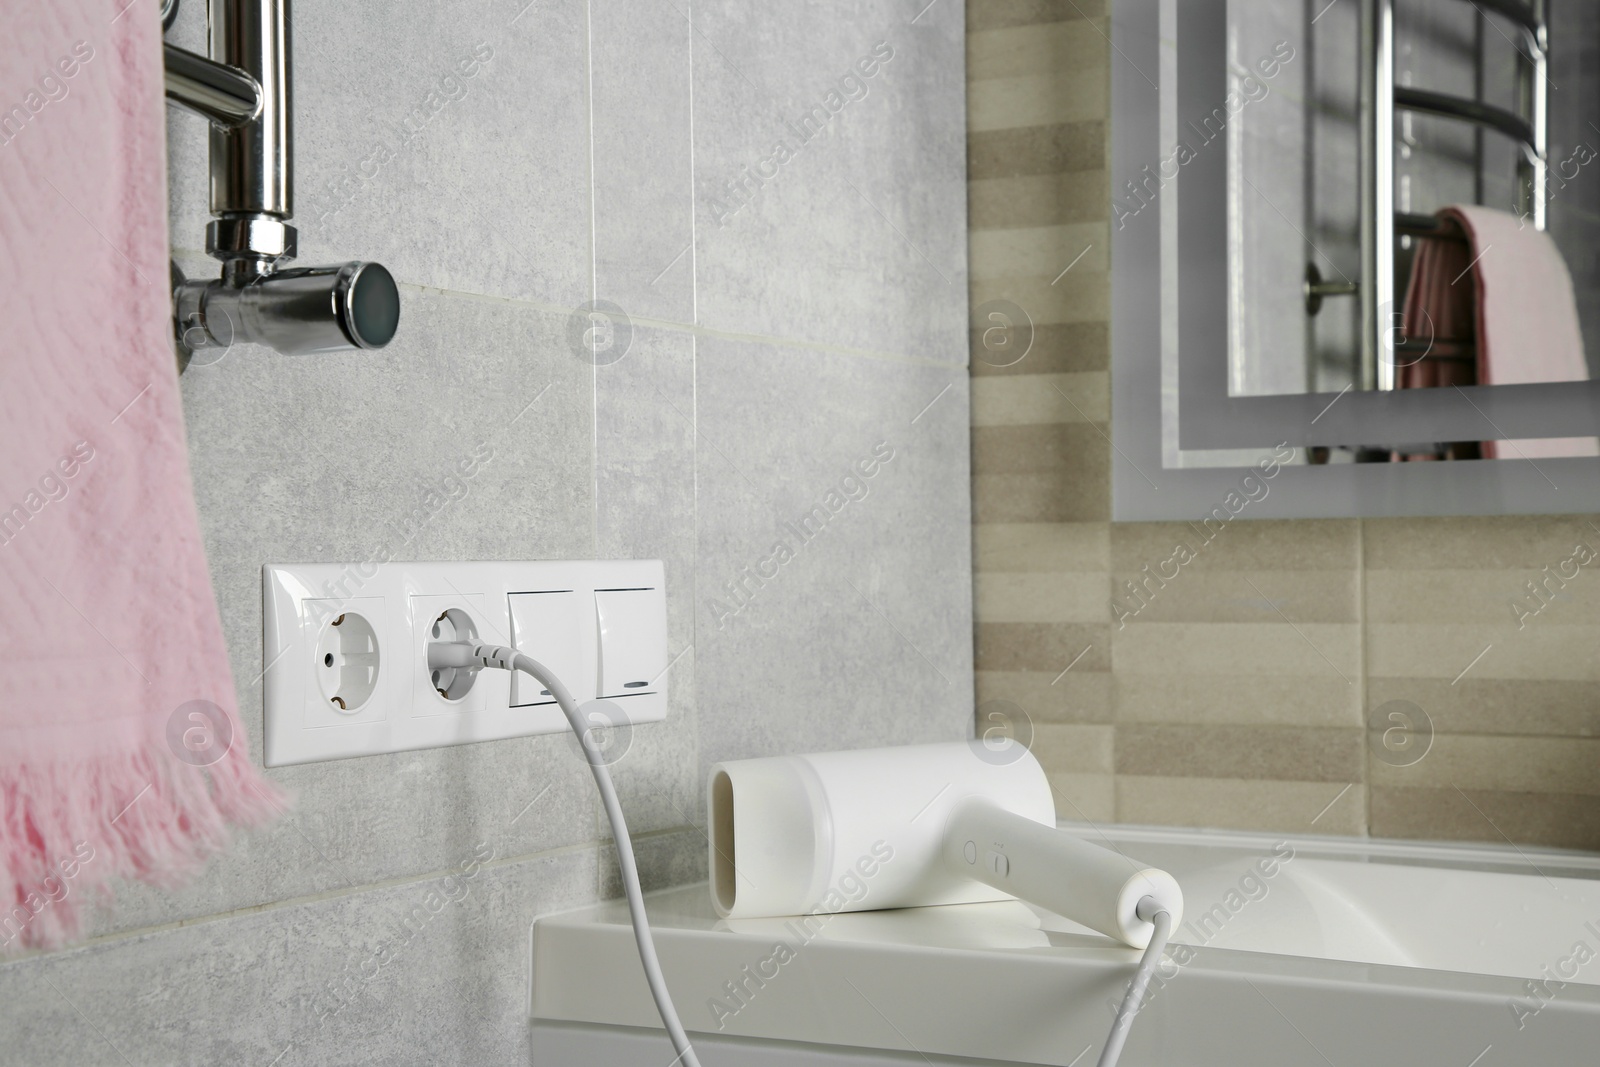 Photo of Hairdryer plugged into power socket on light grey wall in bathroom, space for text